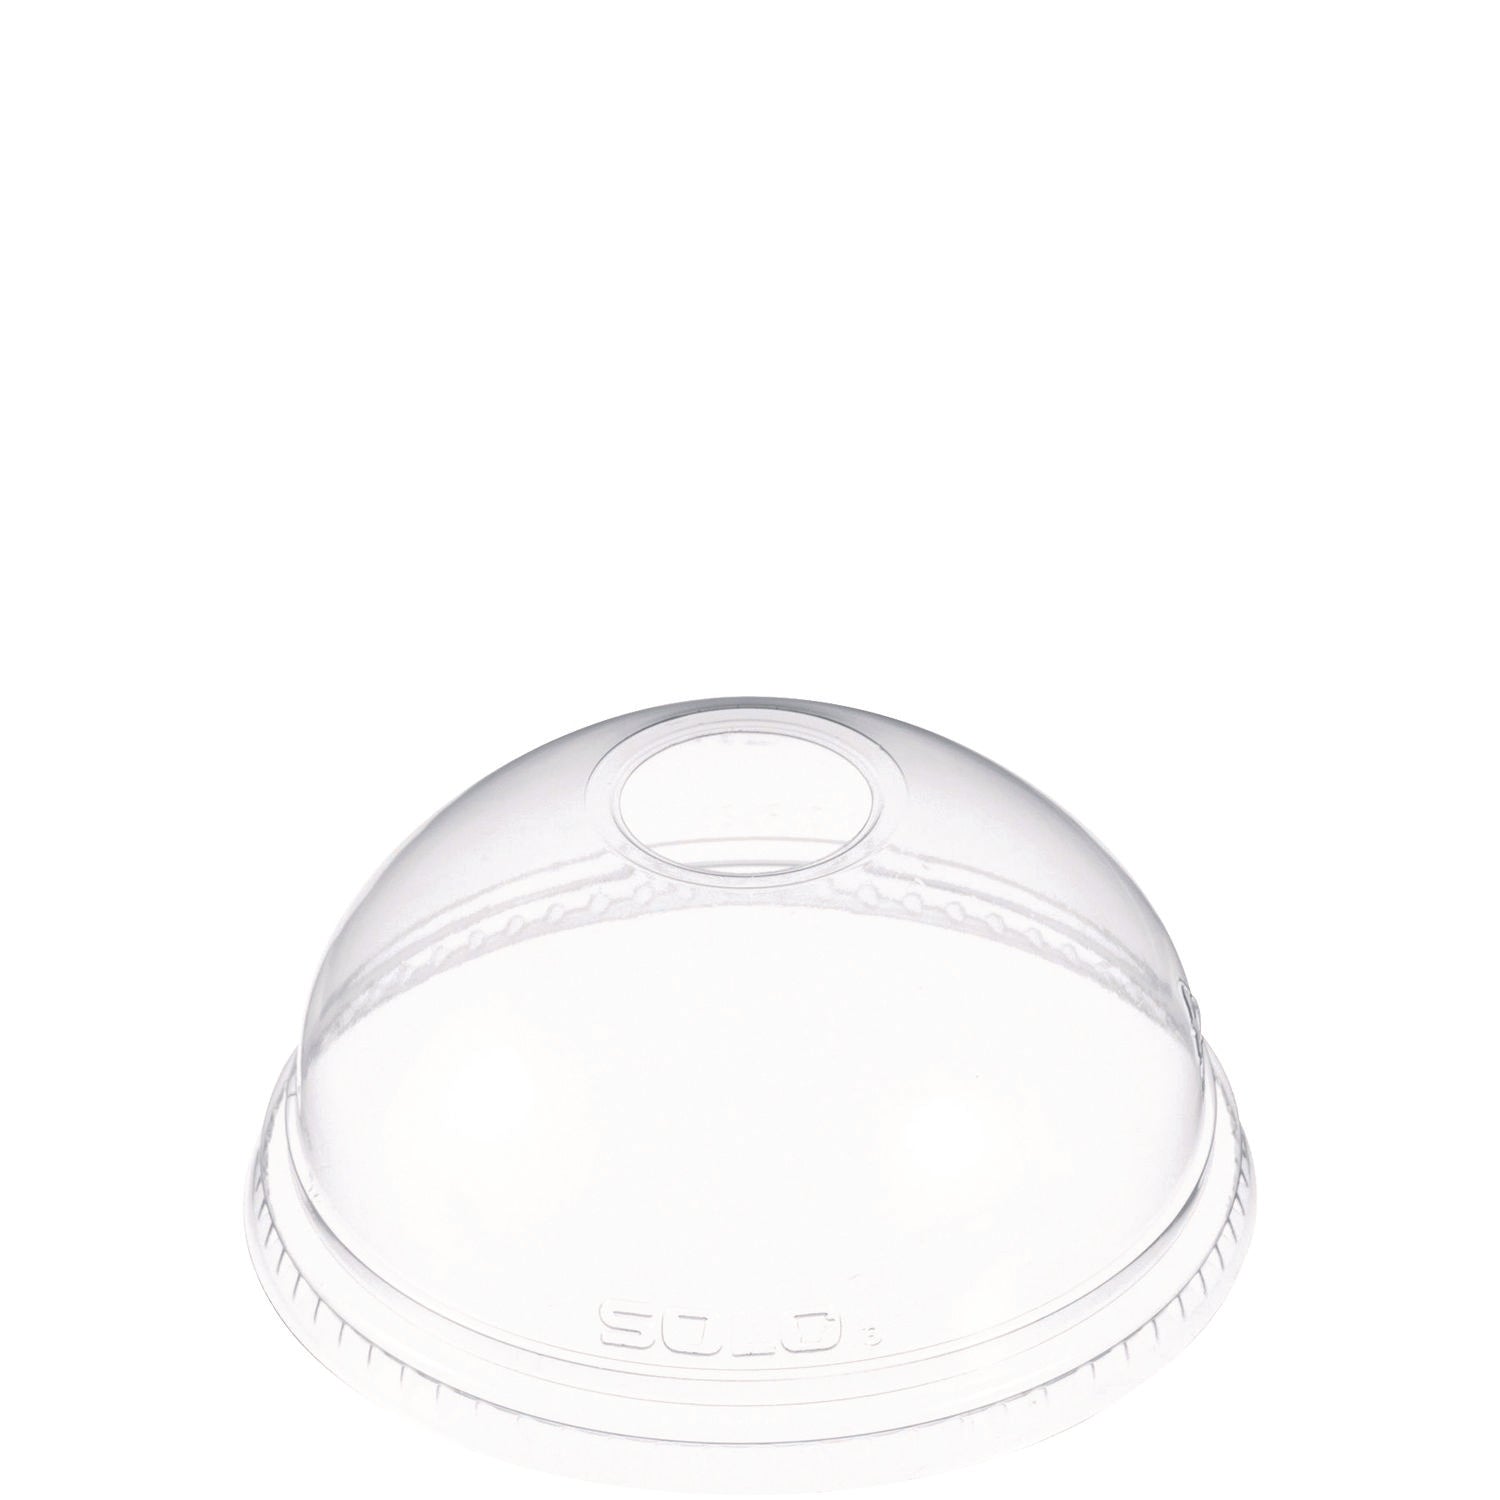 Ultra Clear Dome Cold Cup Lids, Fits 16 oz to 24 oz Cups, PET, Clear, 1,000/Carton - 